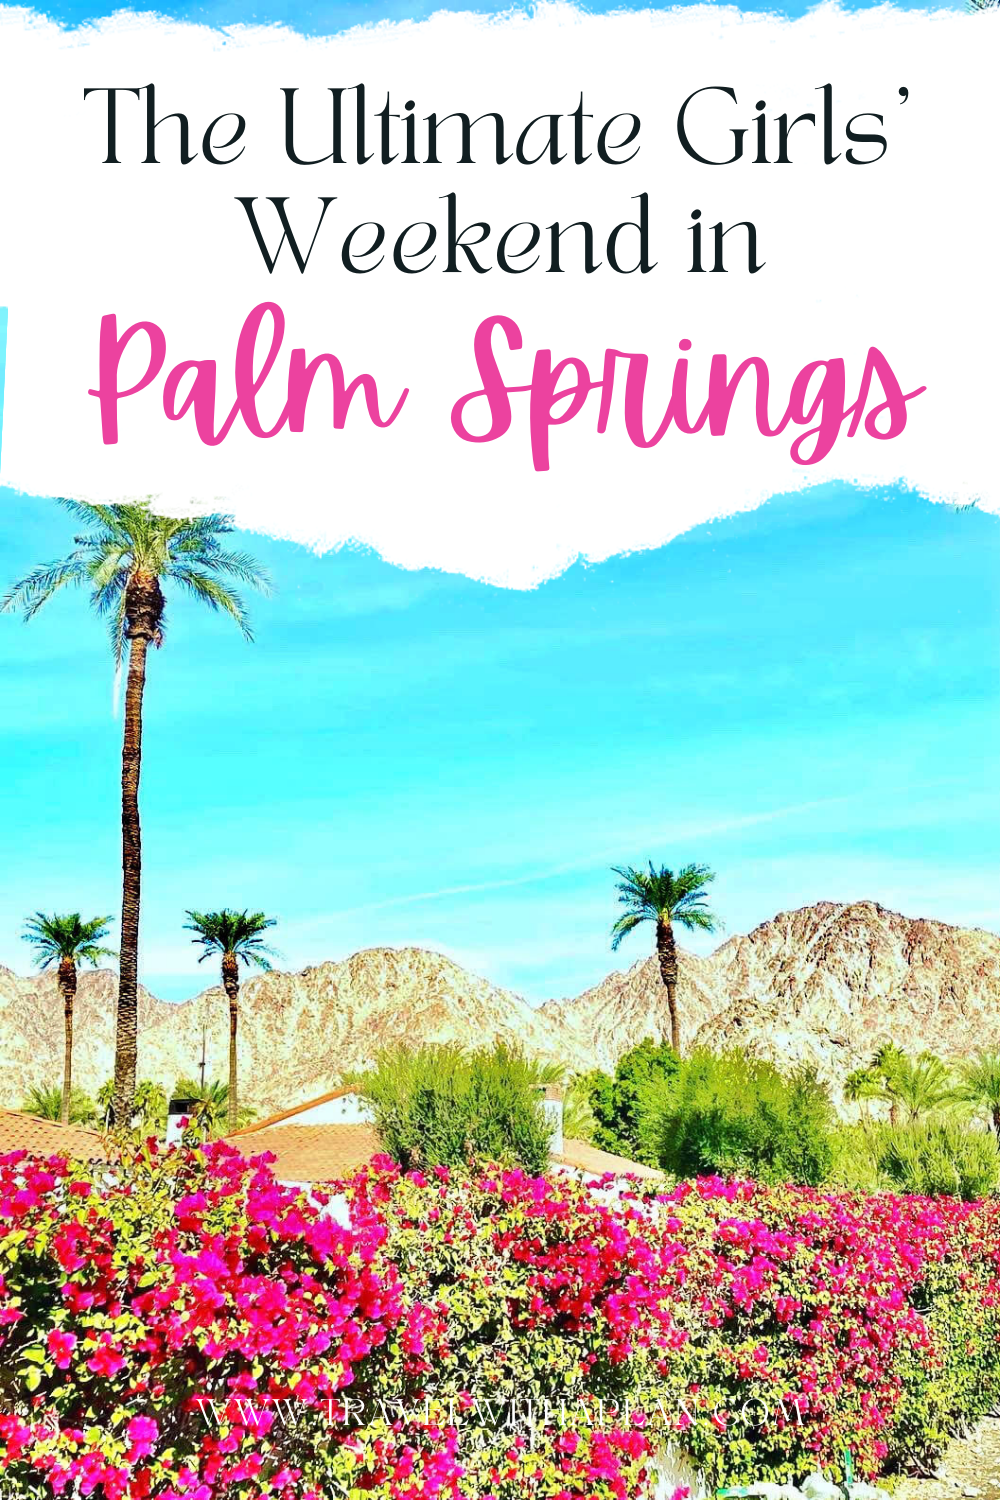 Plan the ultimate girls' weekend in Palm Springs with top US family travel blog, Travel With A Plan!  #girlstrip #girlsweekendgetaway #PalmSprings